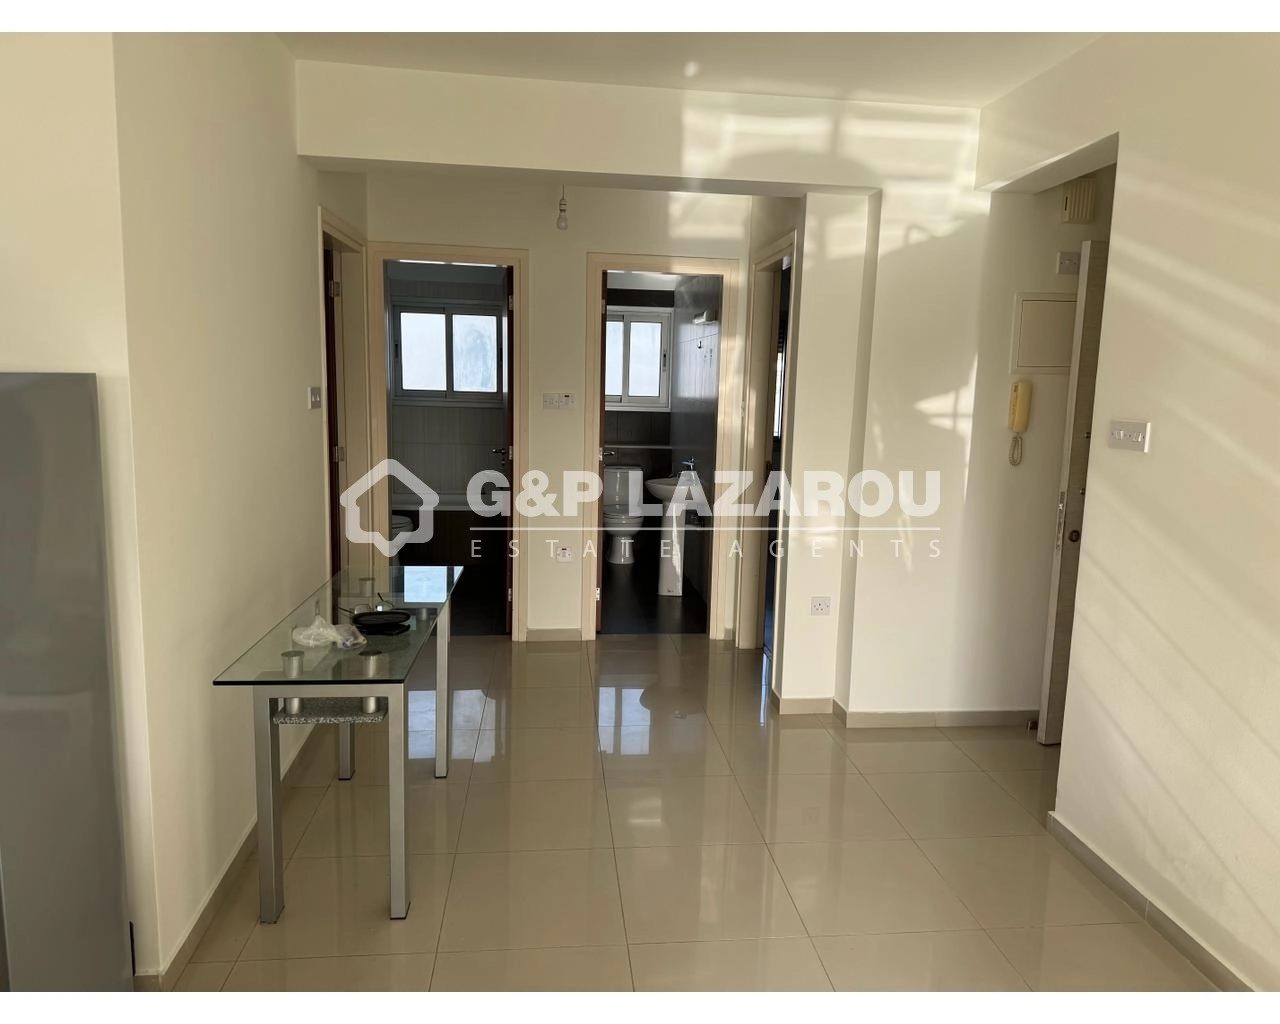 1 Bedroom Apartment for Rent in Mouttagiaka, Limassol District